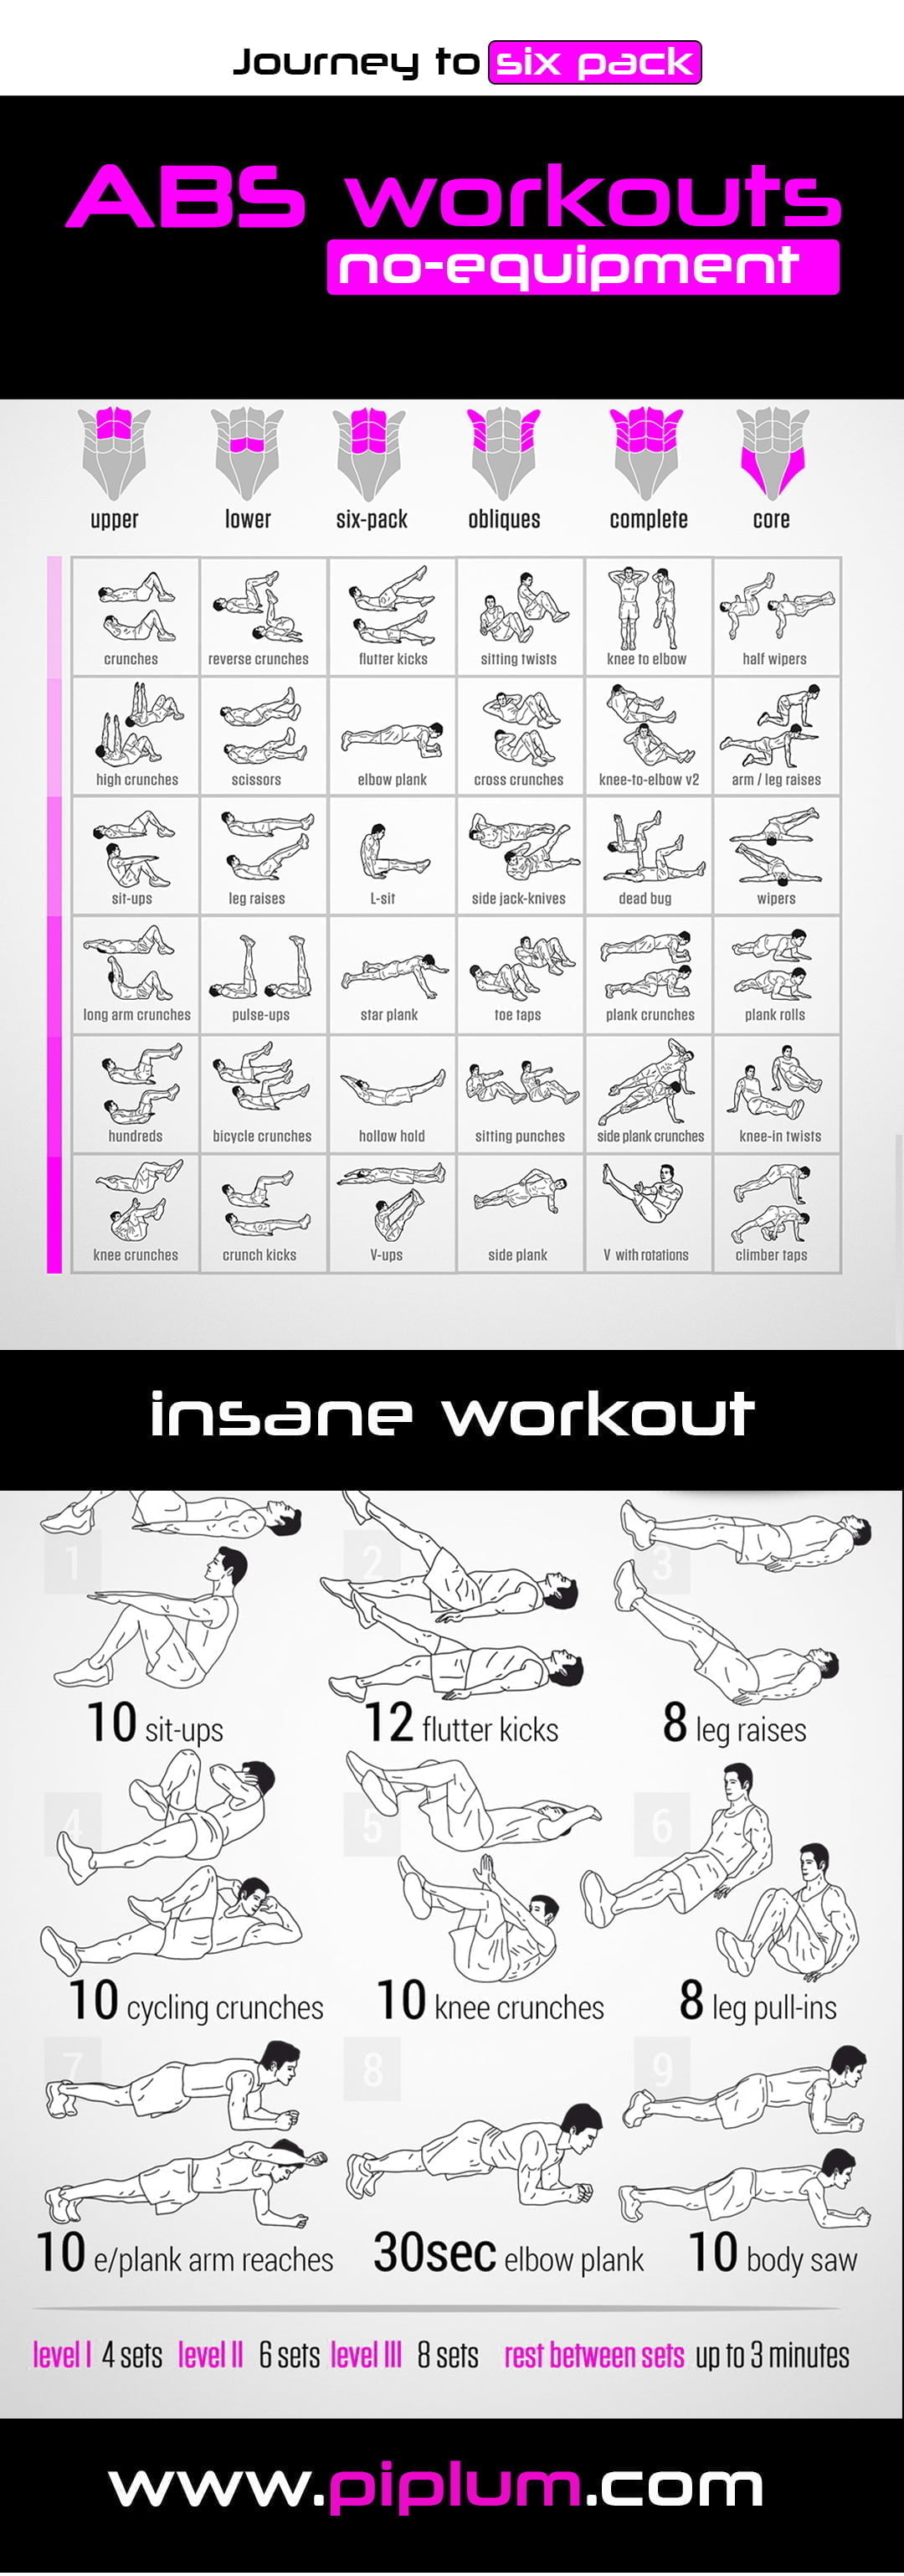 abs-workouts-no-equipment-six-pack-poster